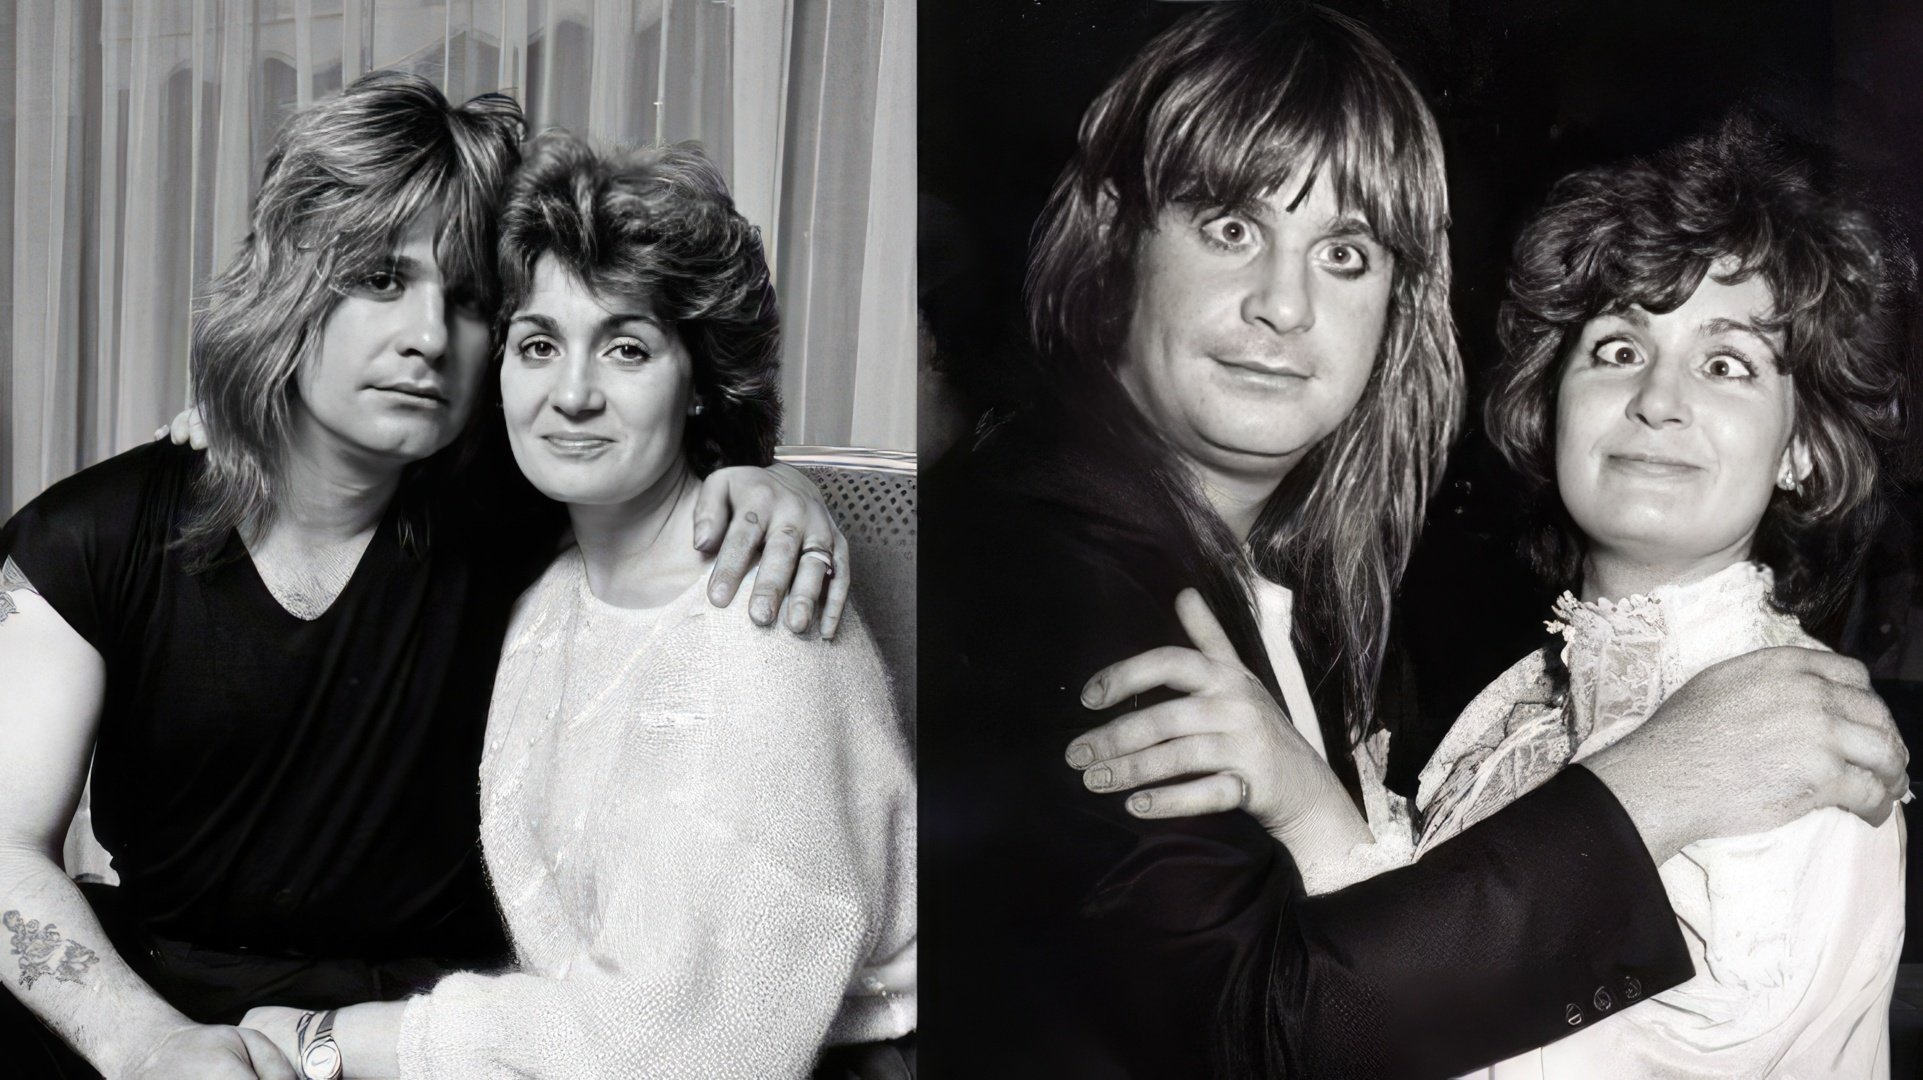 Ozzy and Sharon Osbourne in their youth